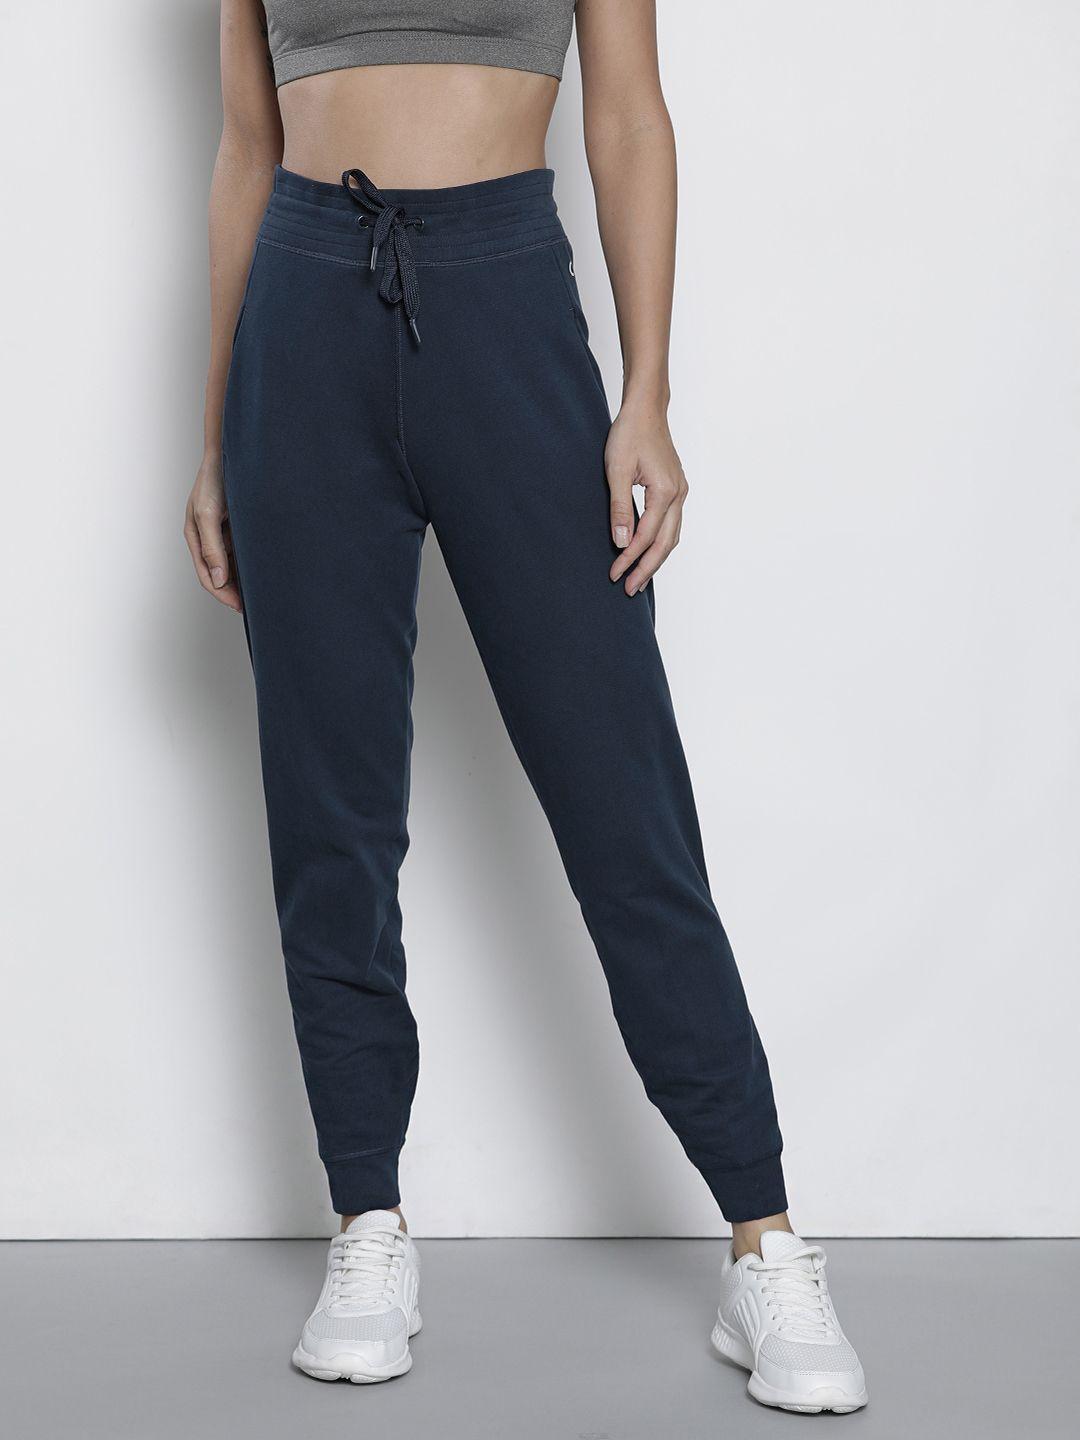 marks & spencer women navy blue solid joggers